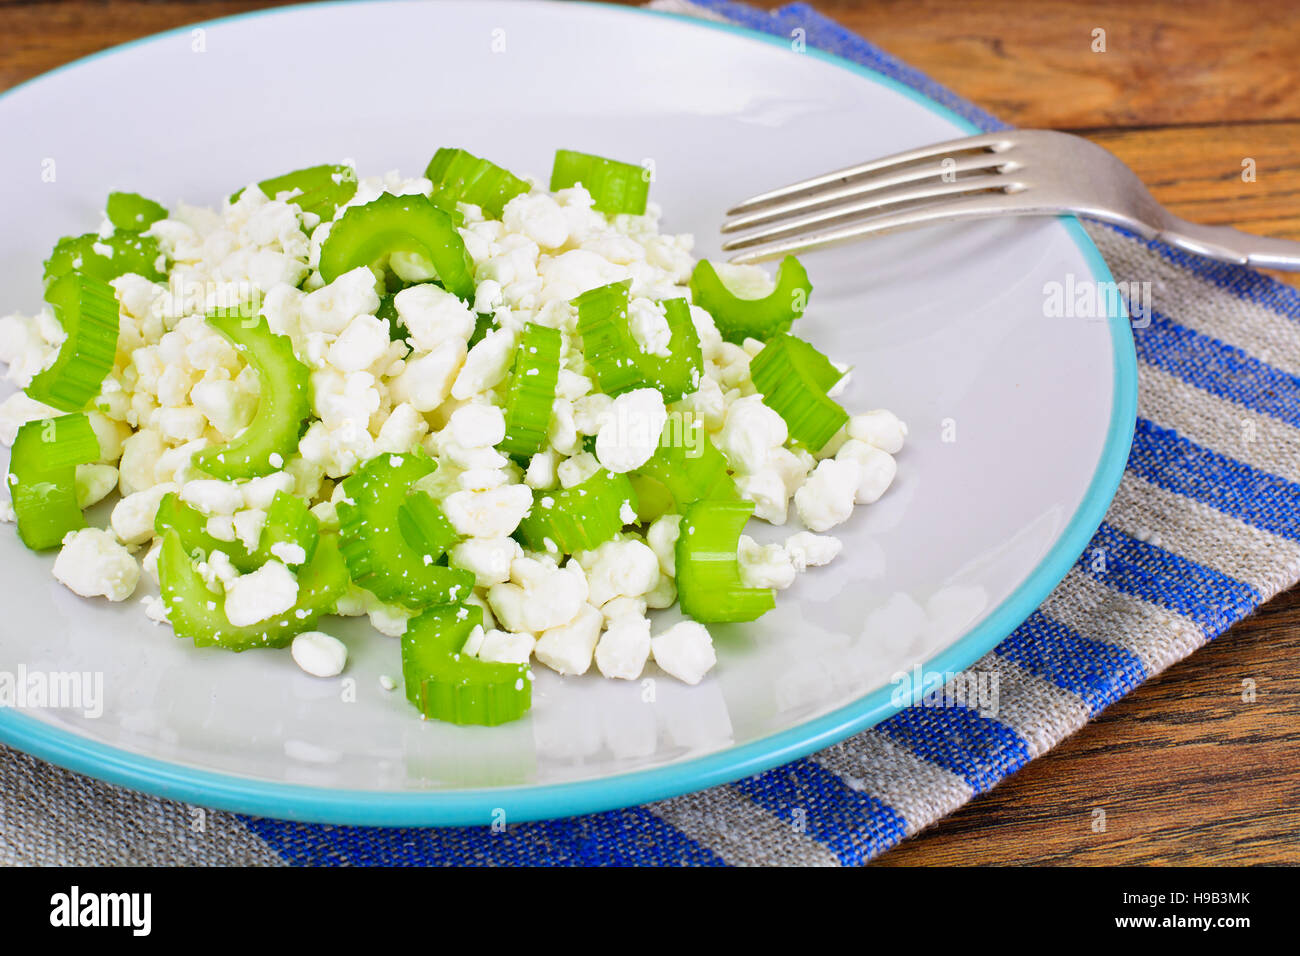 Dietary Dish Of Granulated Cottage Cheese And Celery Studio Photo